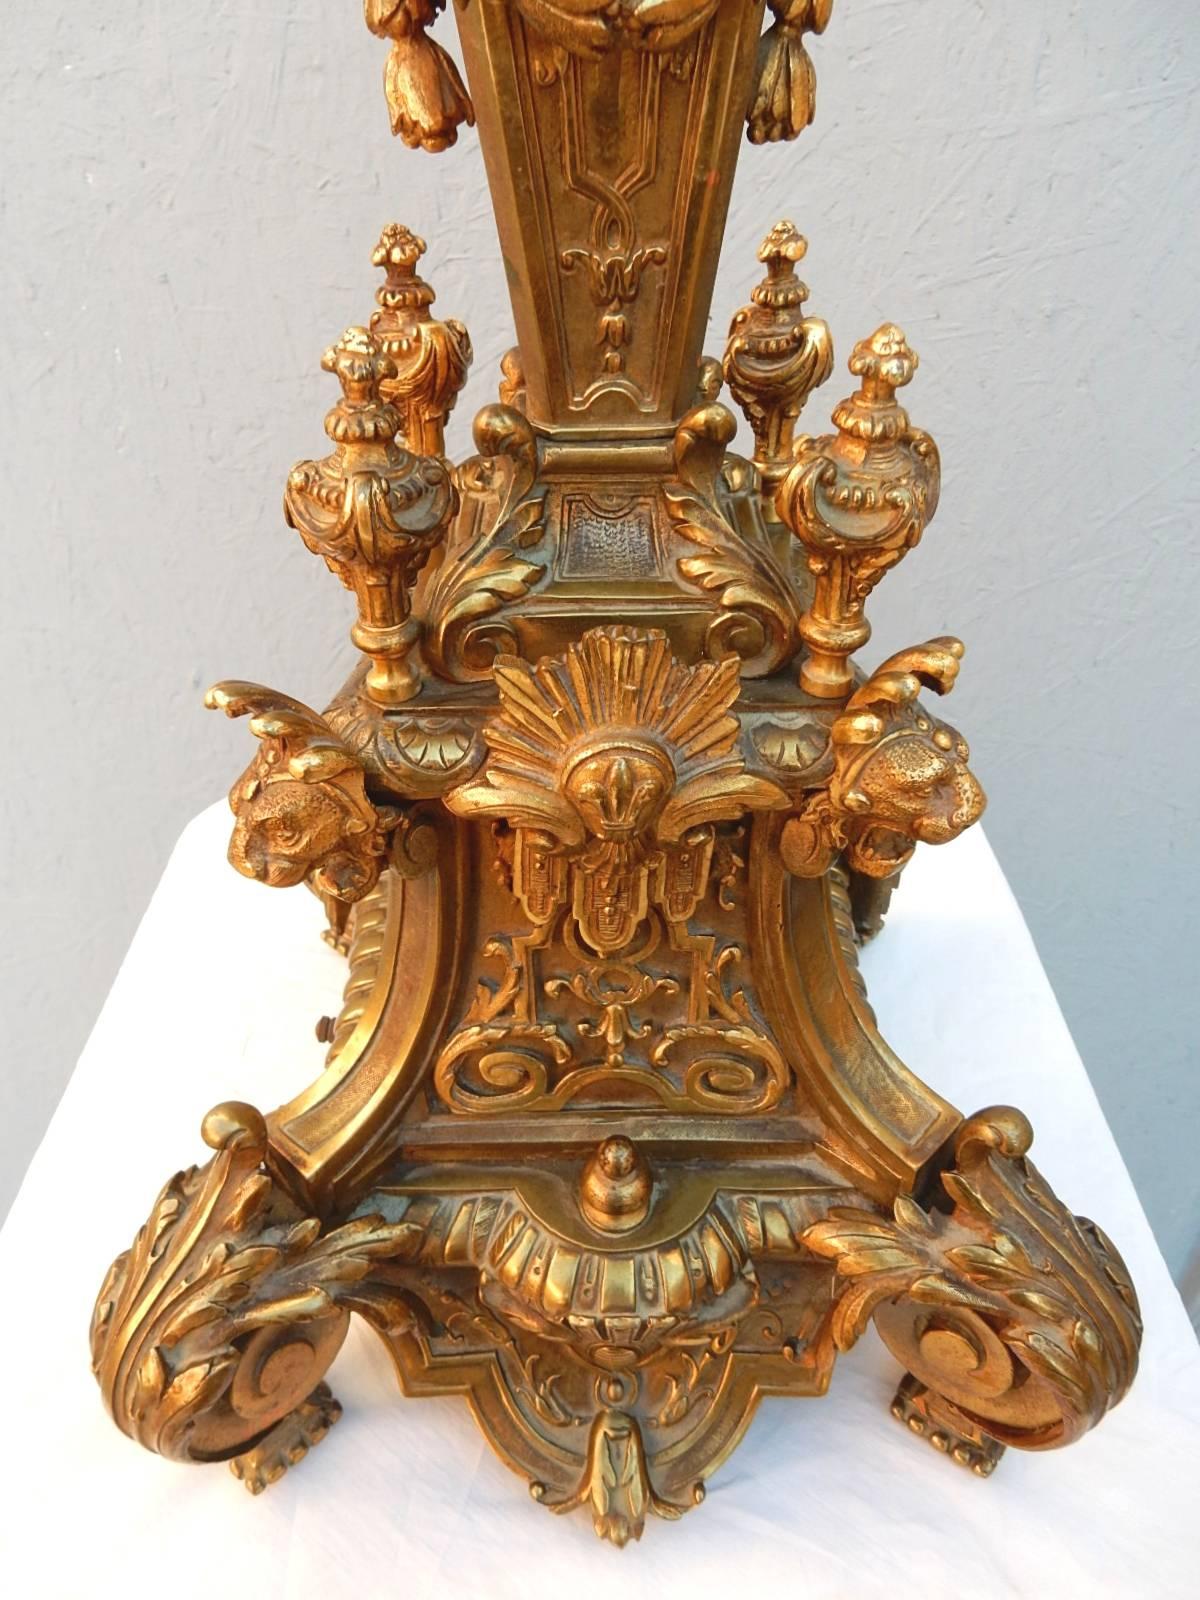 Heavy, solid bronze candelabra covered in gold gilding with amazing aged patina. At over three feet tall it's a statement piece.
Exquisite detail as one would expect from this era.
Masterfully electrified to a seven-candle bulb lamp.
Excellent